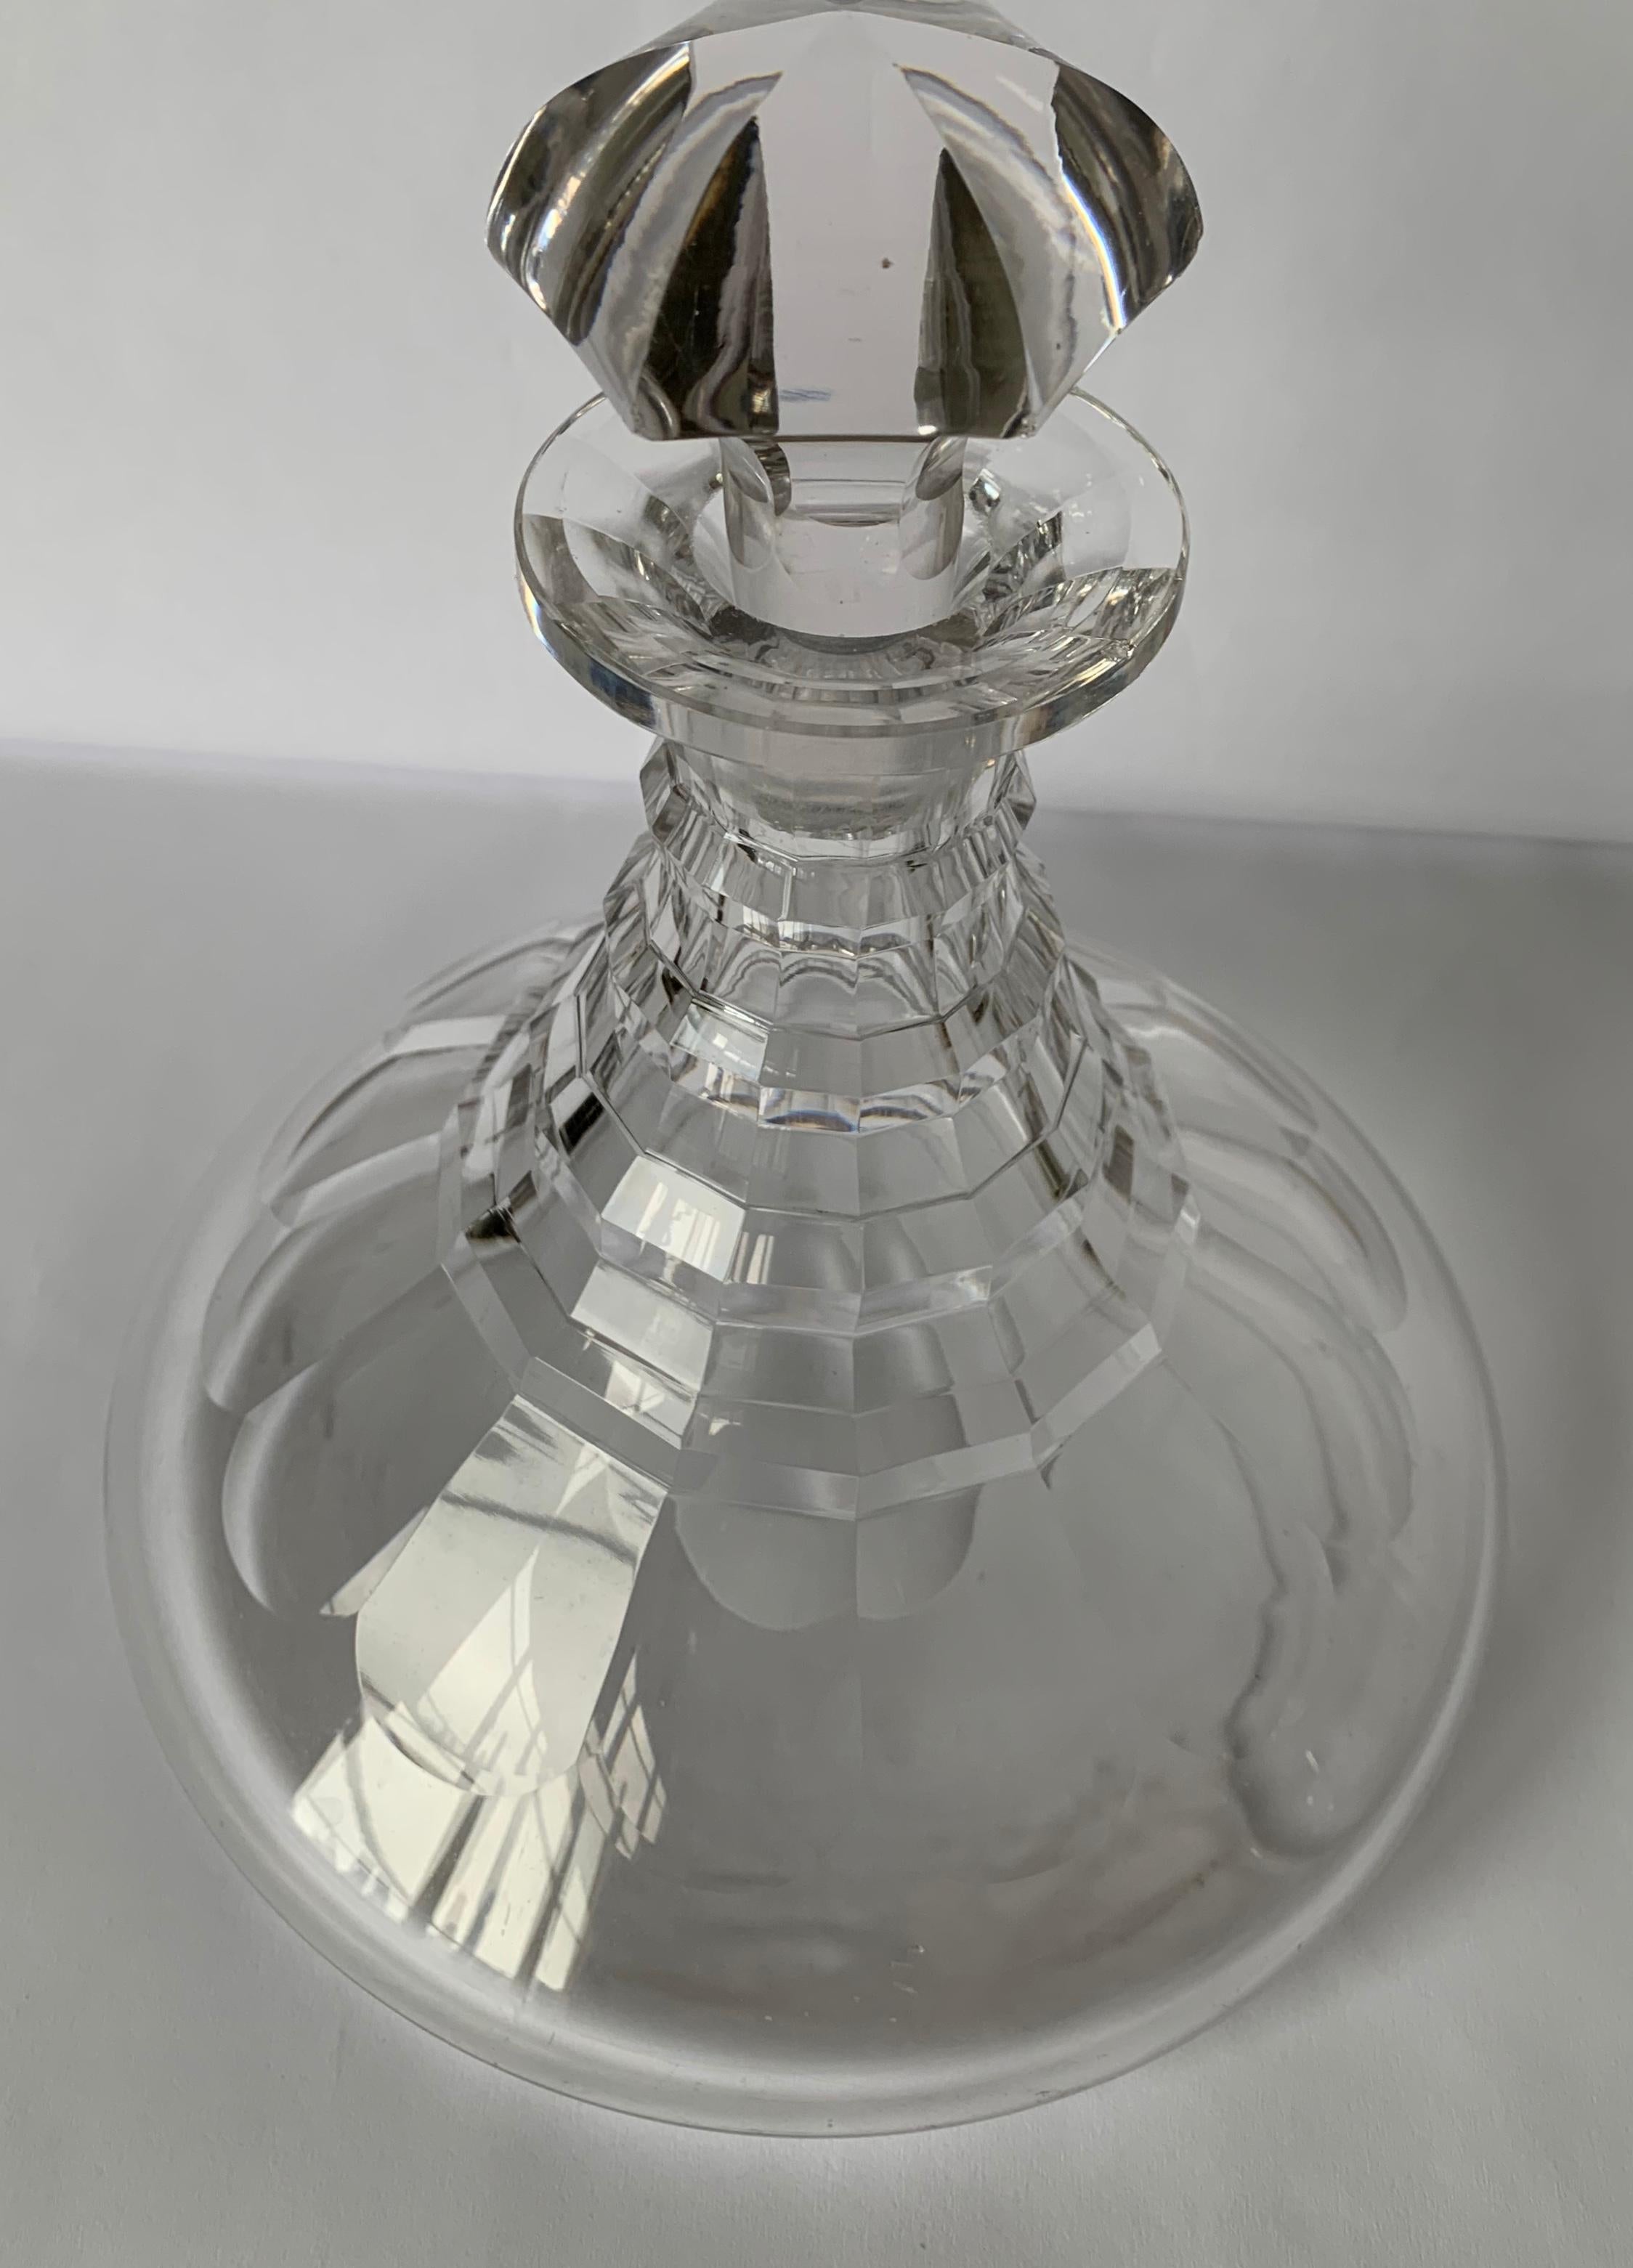 English 1810 George III cut glass ships decanter. All-over faceted cut glass pattern. No makers mark or signature.
Purchased at Taylor B. Williams antiques, 1999.